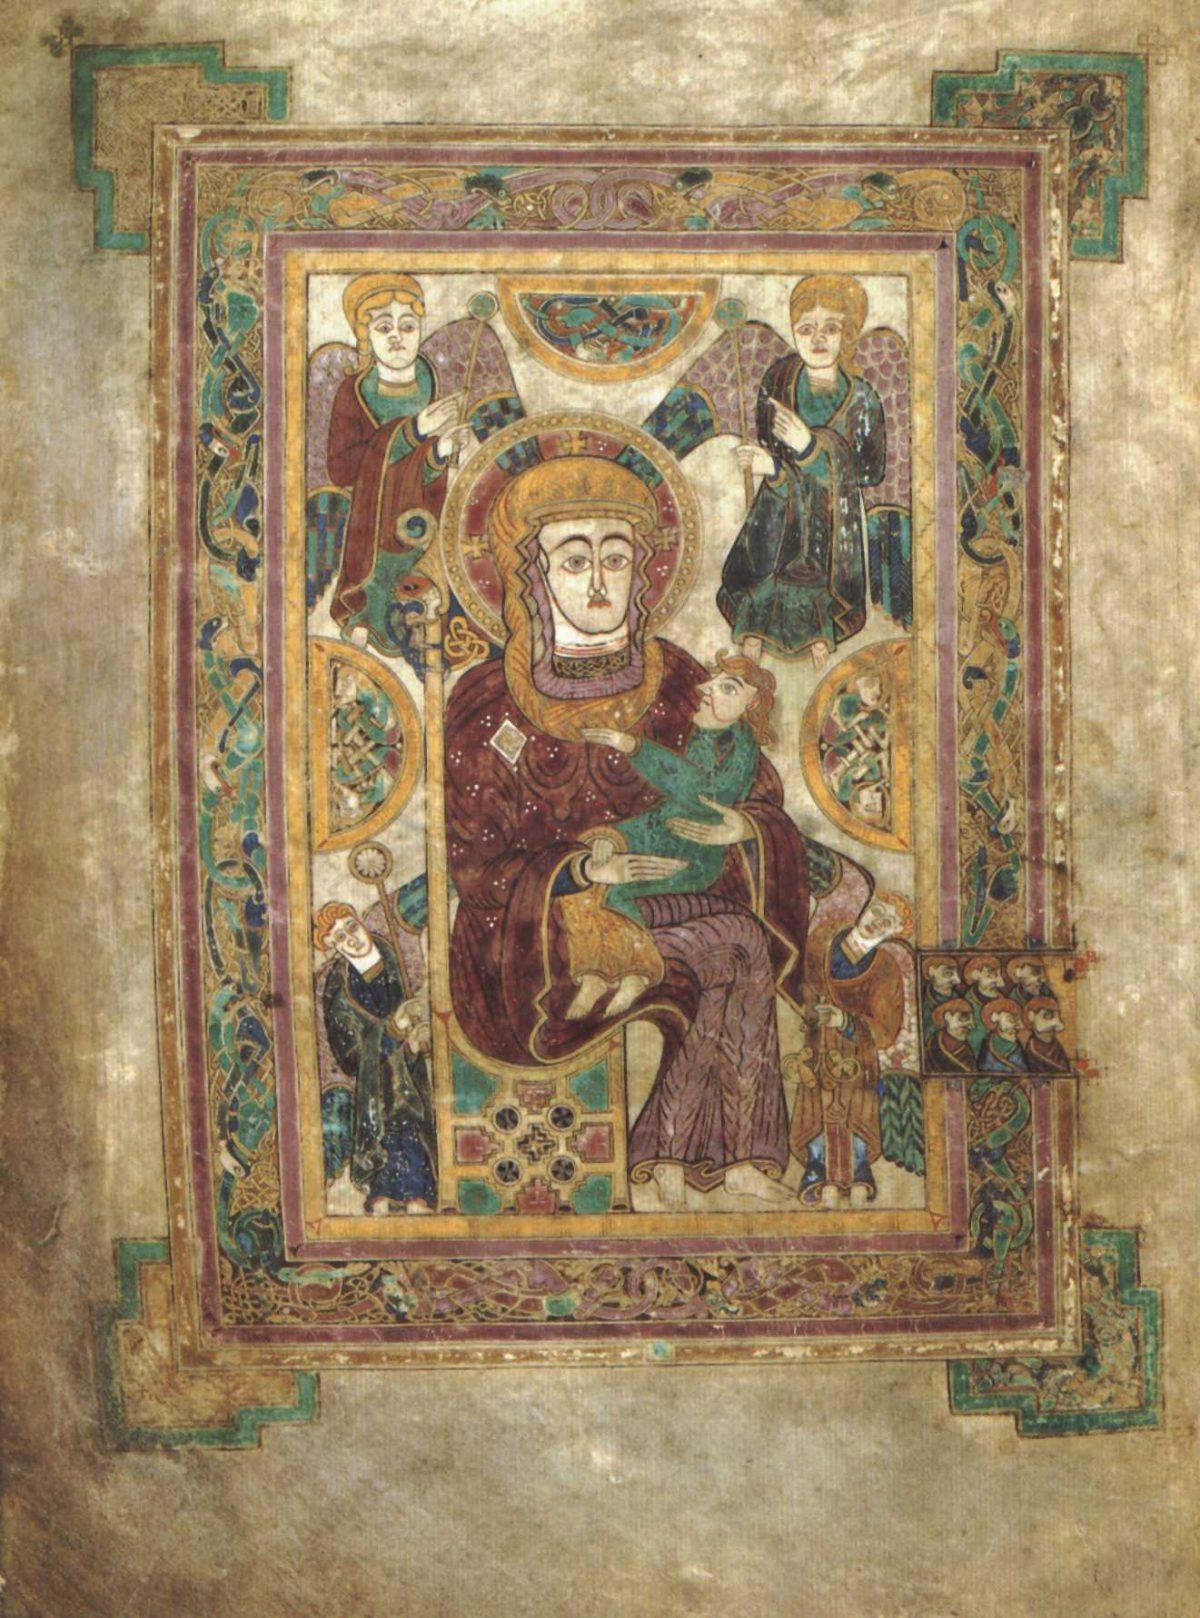 Possibly the earliest surviving example of a Western Madonna and Child, from the Book of Kells, circa 800 A.D. (Public Domain)